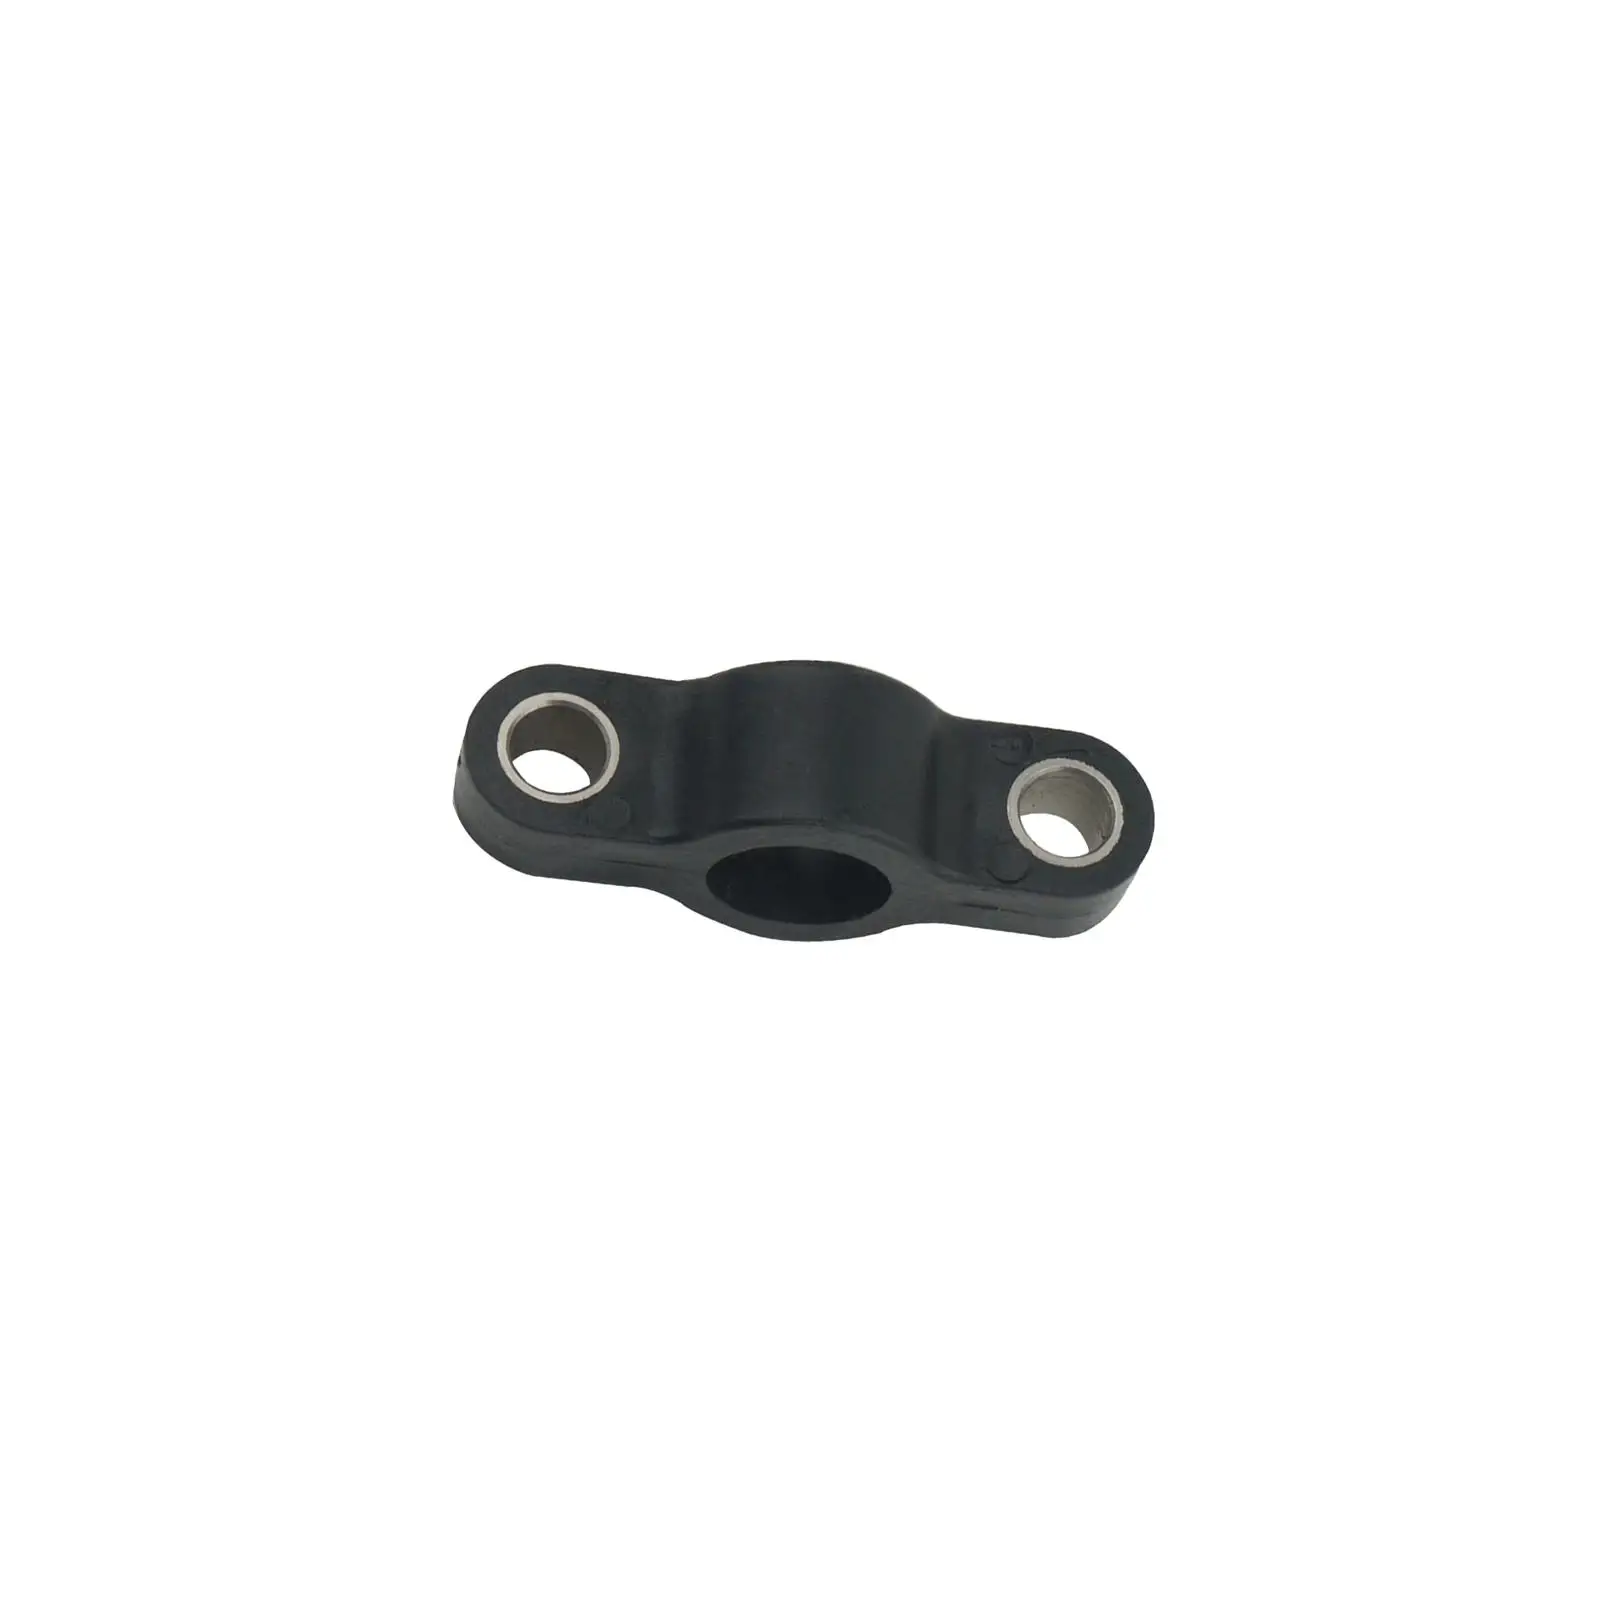 Bracket F15-05040002 for Parsun Engine Easily Install Boat Repairing Accessory